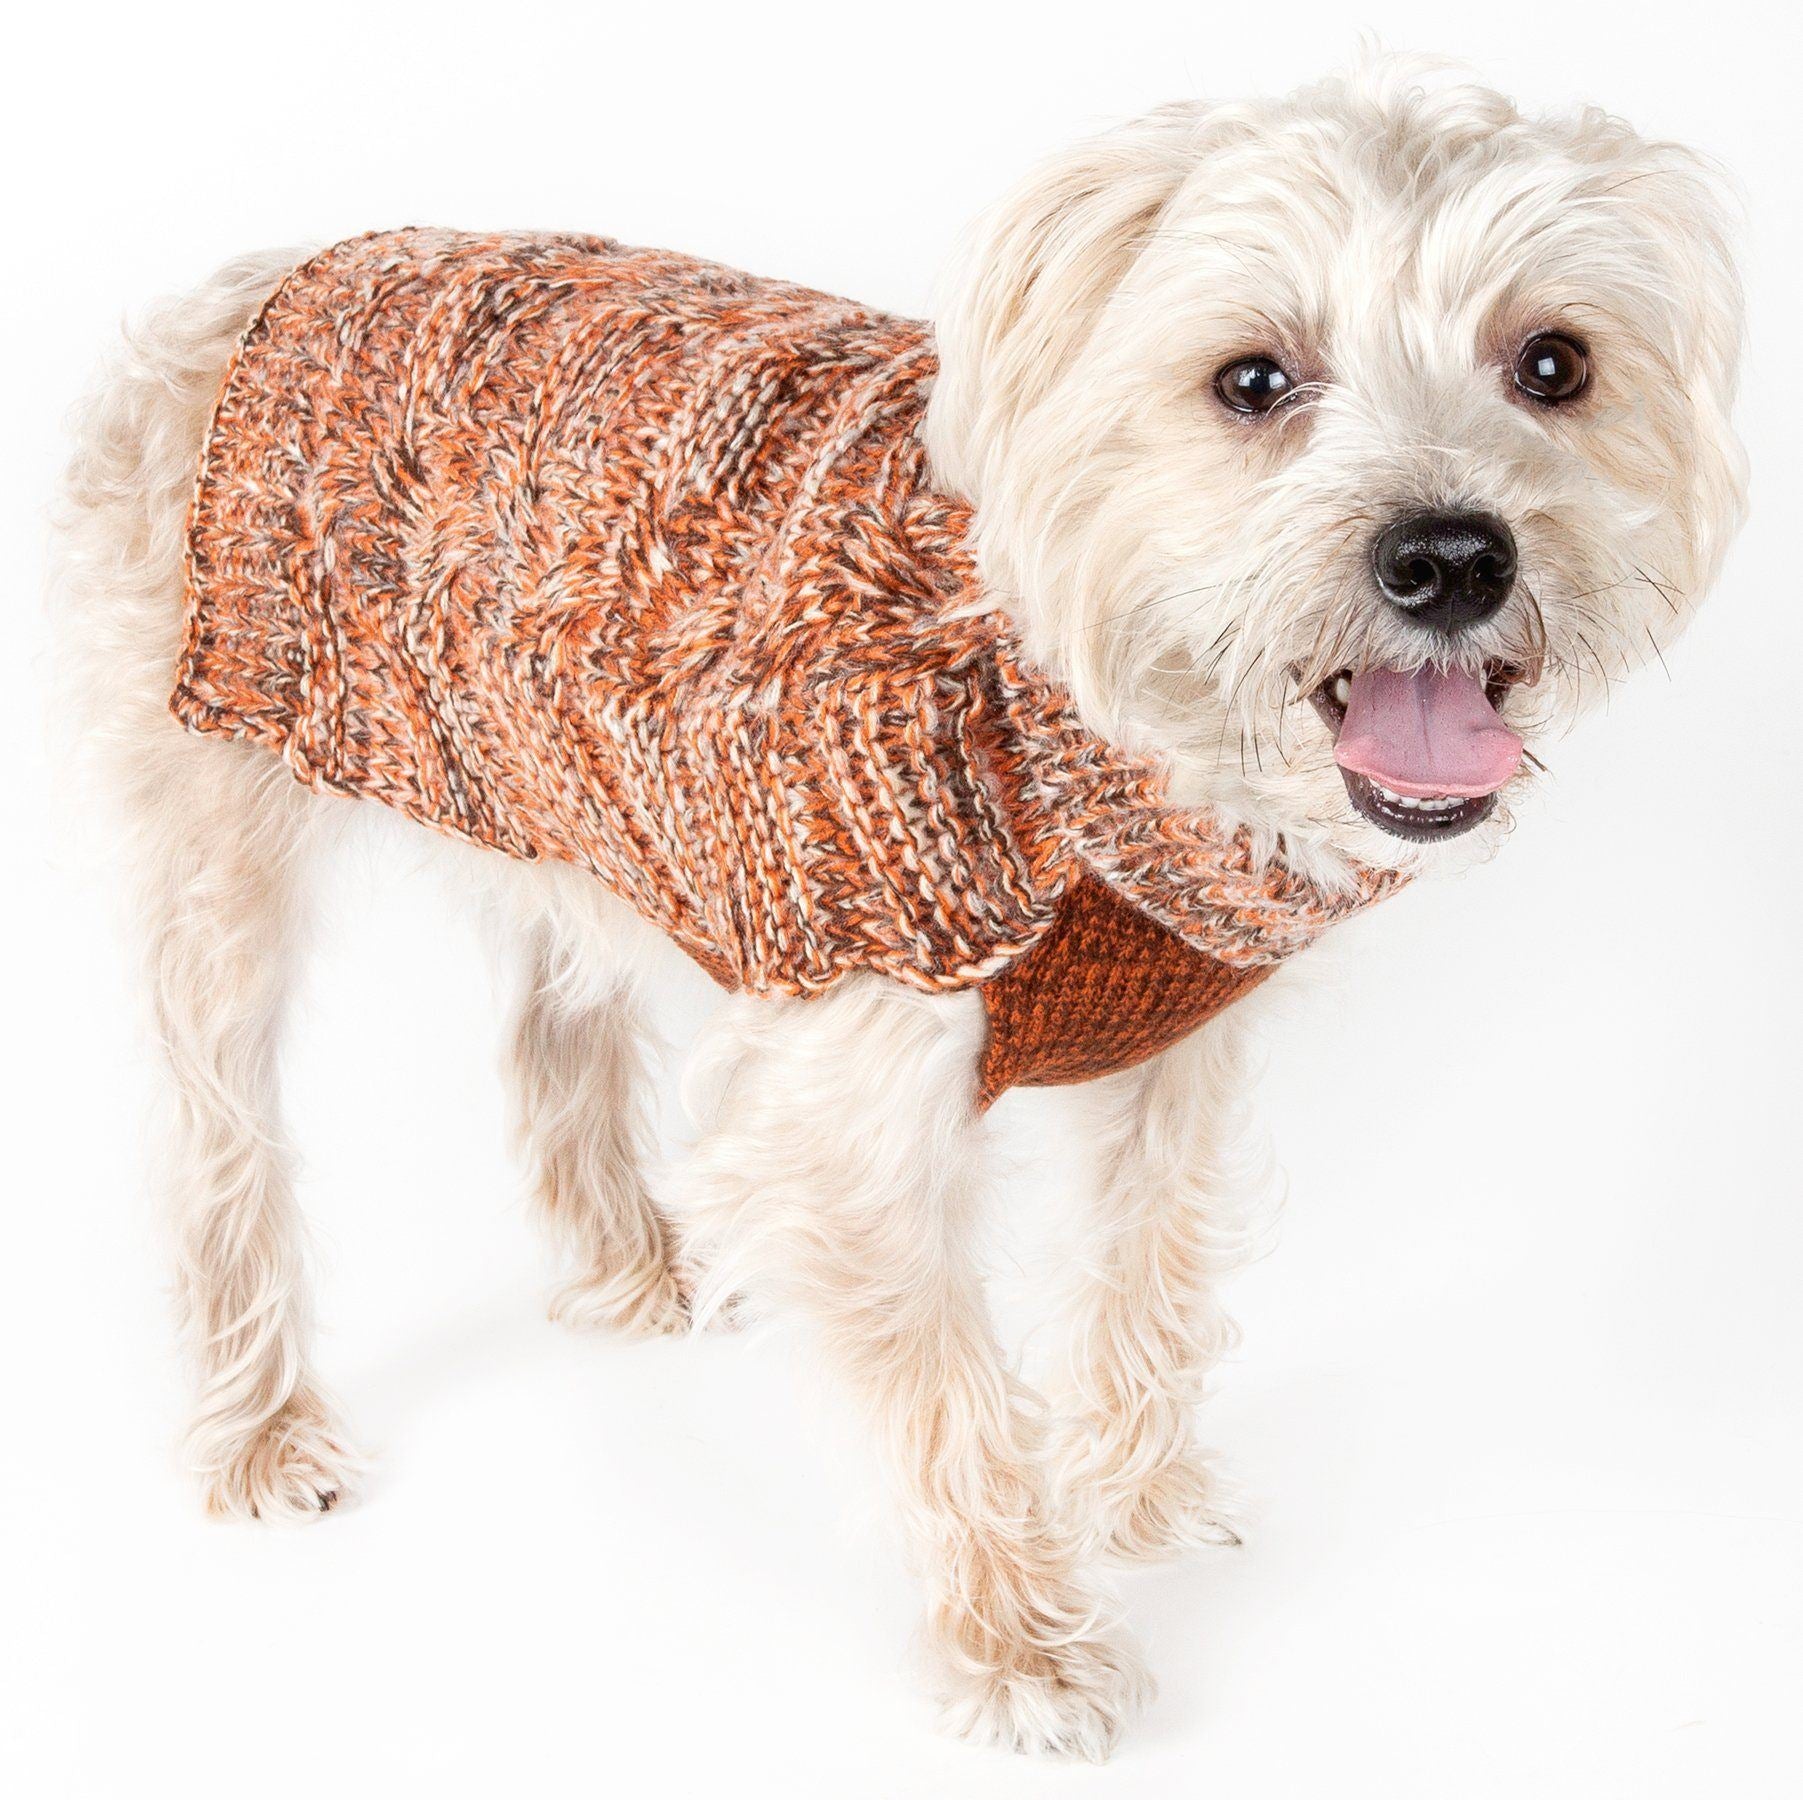 Pet Life ® 'Royal Bark' Heavy Cable Knitted Designer Fashion Dog Sweater X-Small Light Brown, Tangerine And Grey